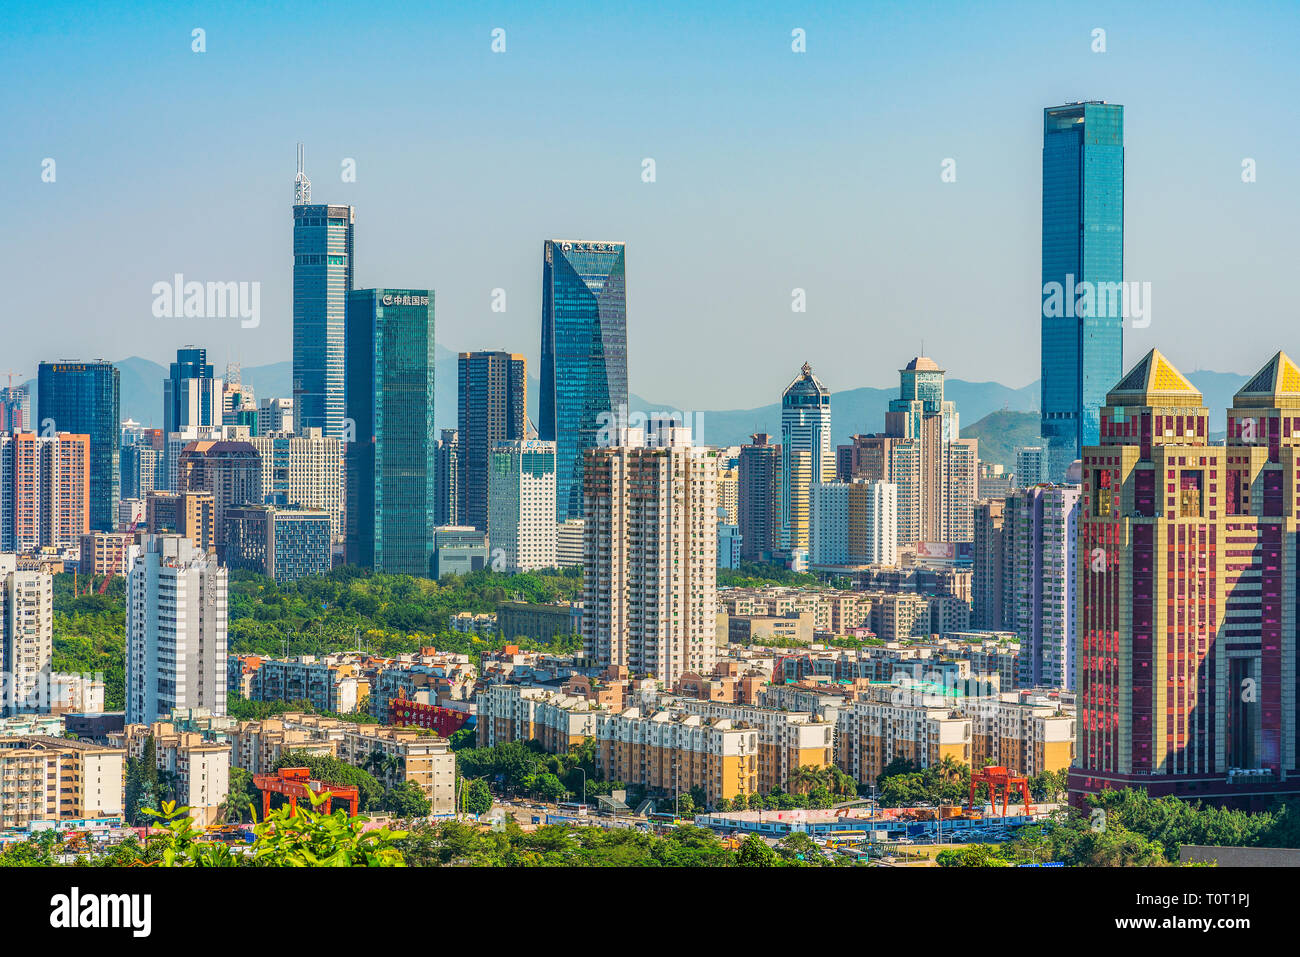 SHENZHEN, CHINA - OCTOBER 28: View of modern city buildings in the downtown area taken from Lianhuashan park on October 28, 2018 in Shenzhen Stock Photo